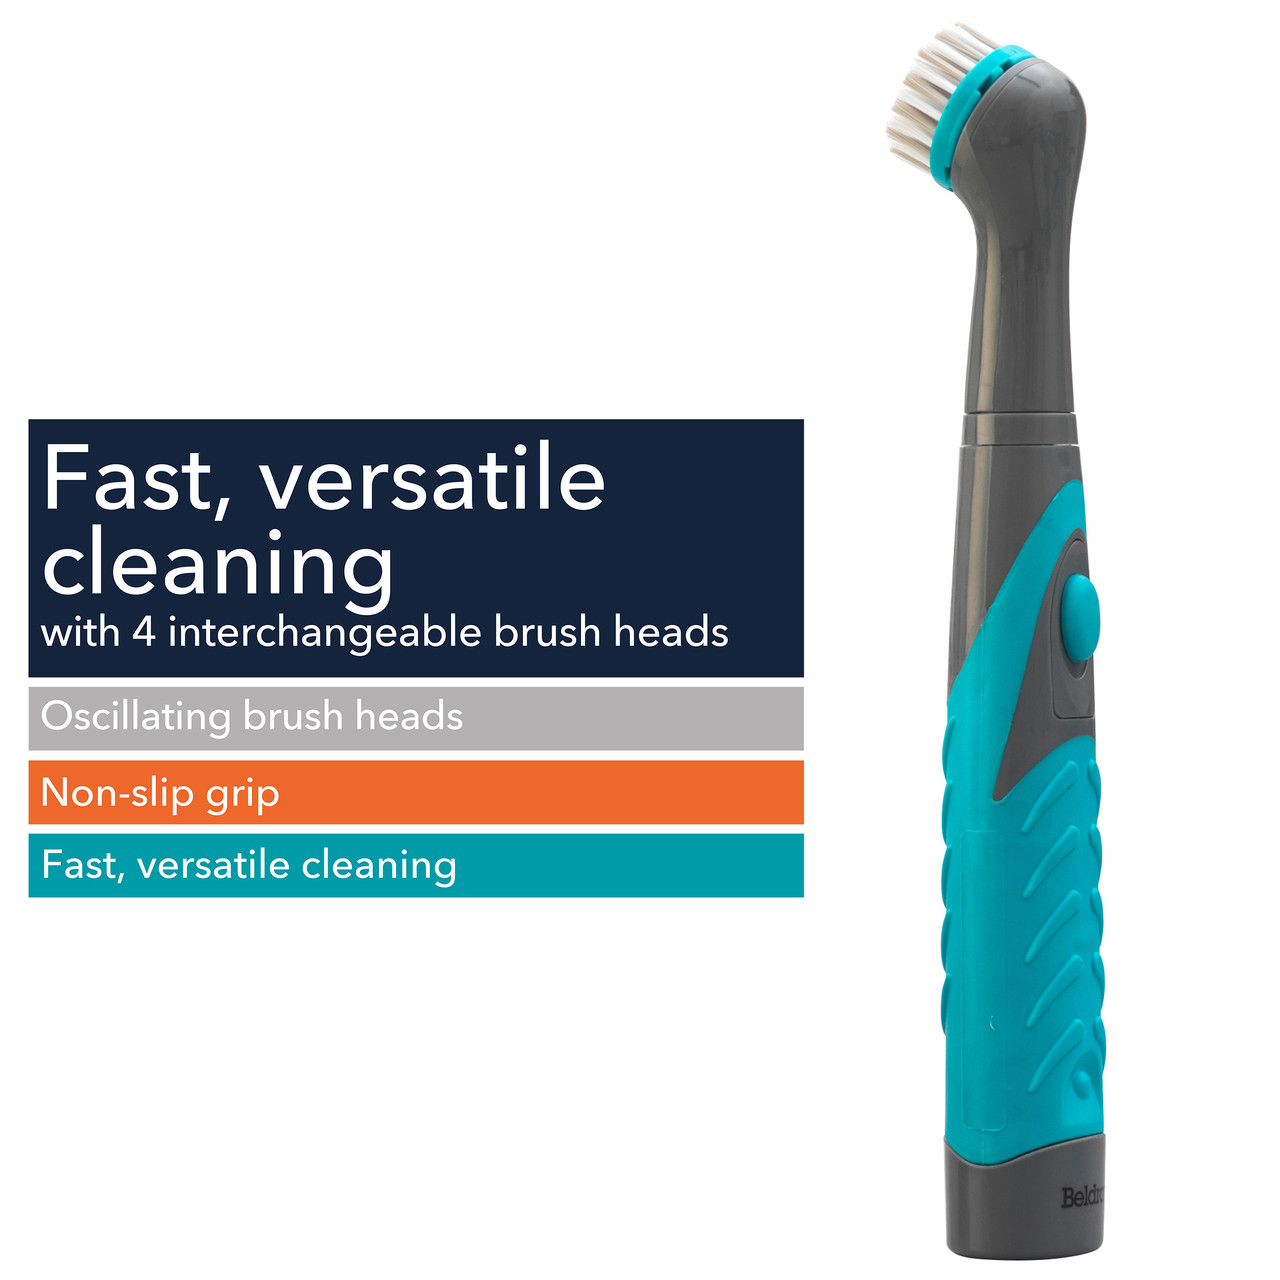 https://cdn11.bigcommerce.com/s-lm3kf40fnq/images/stencil/1280x1280/products/755/5792/deep-clean-power-clean-scrubber-brush-with-4-interchangeable-and-oscillating-heads-beldray-la082718eu7-5053191082718__65298.1658498769.jpg?c=1